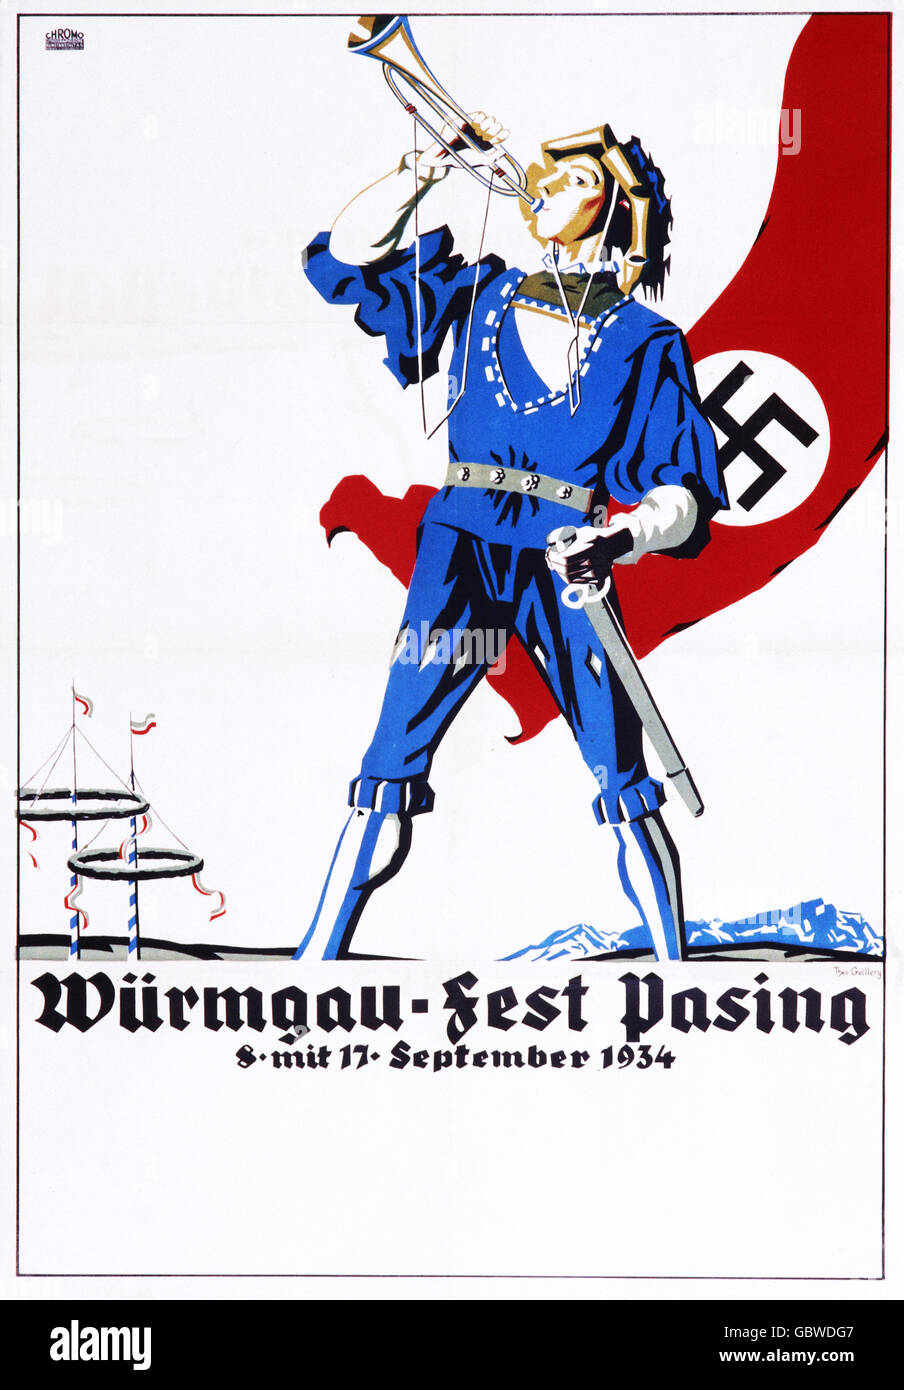 advertising, events, advertising poster for the Würmgau - Fest, Munich - Pasing, 8. - 17.9.1934, Additional-Rights-Clearences-Not Available Stock Photo